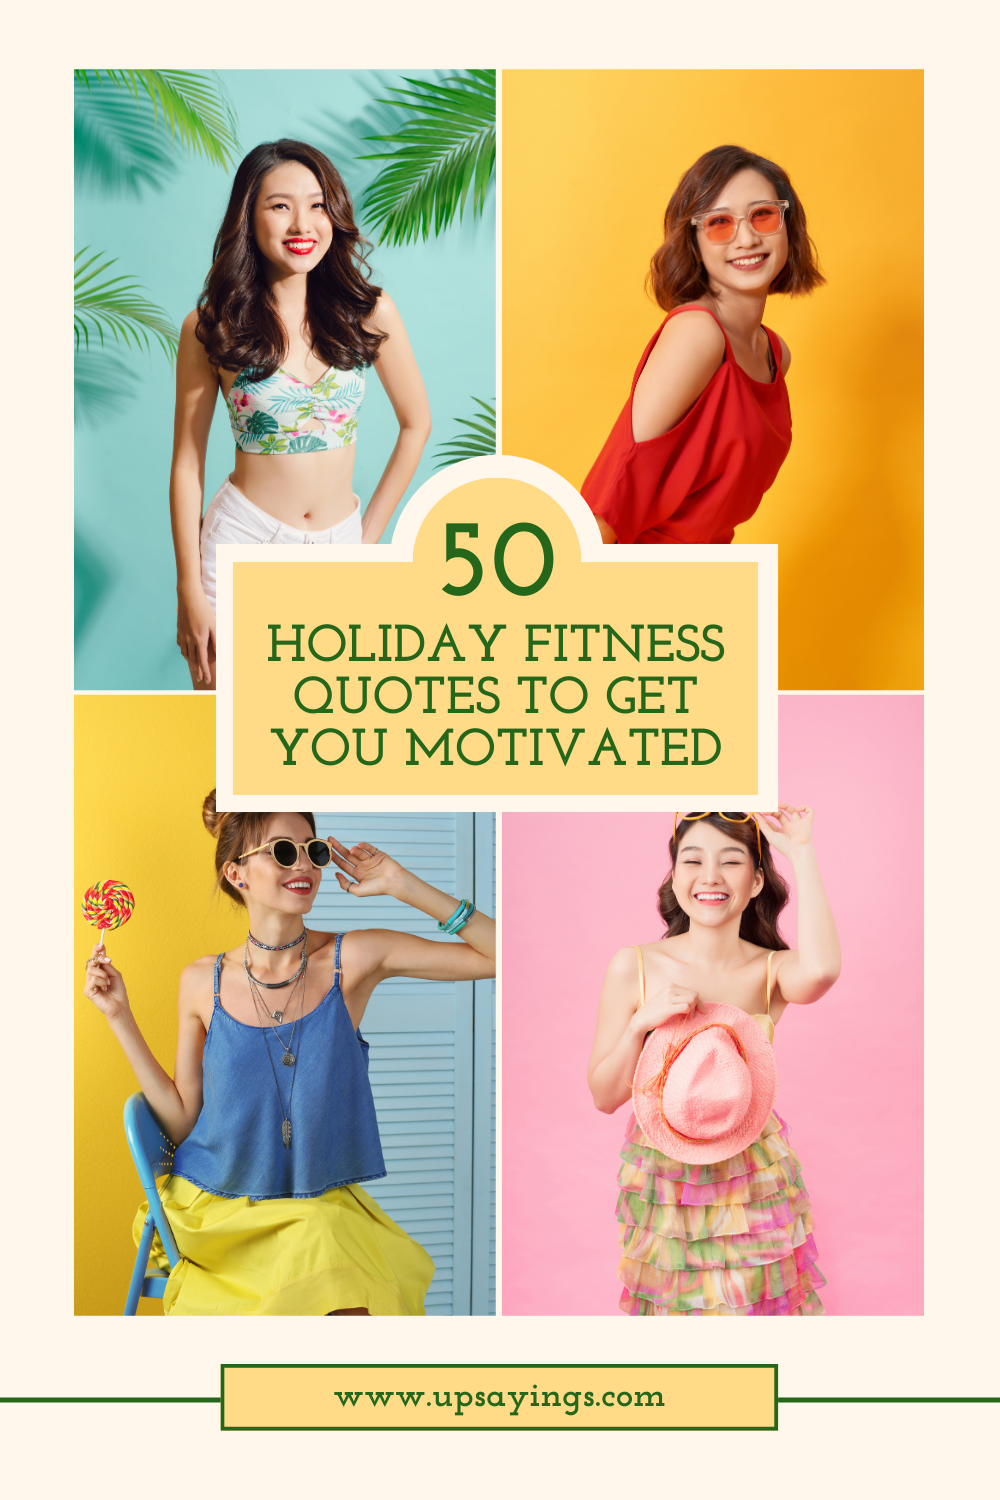 10 Inspirational Holiday Fitness Quotes for Your Motivation and